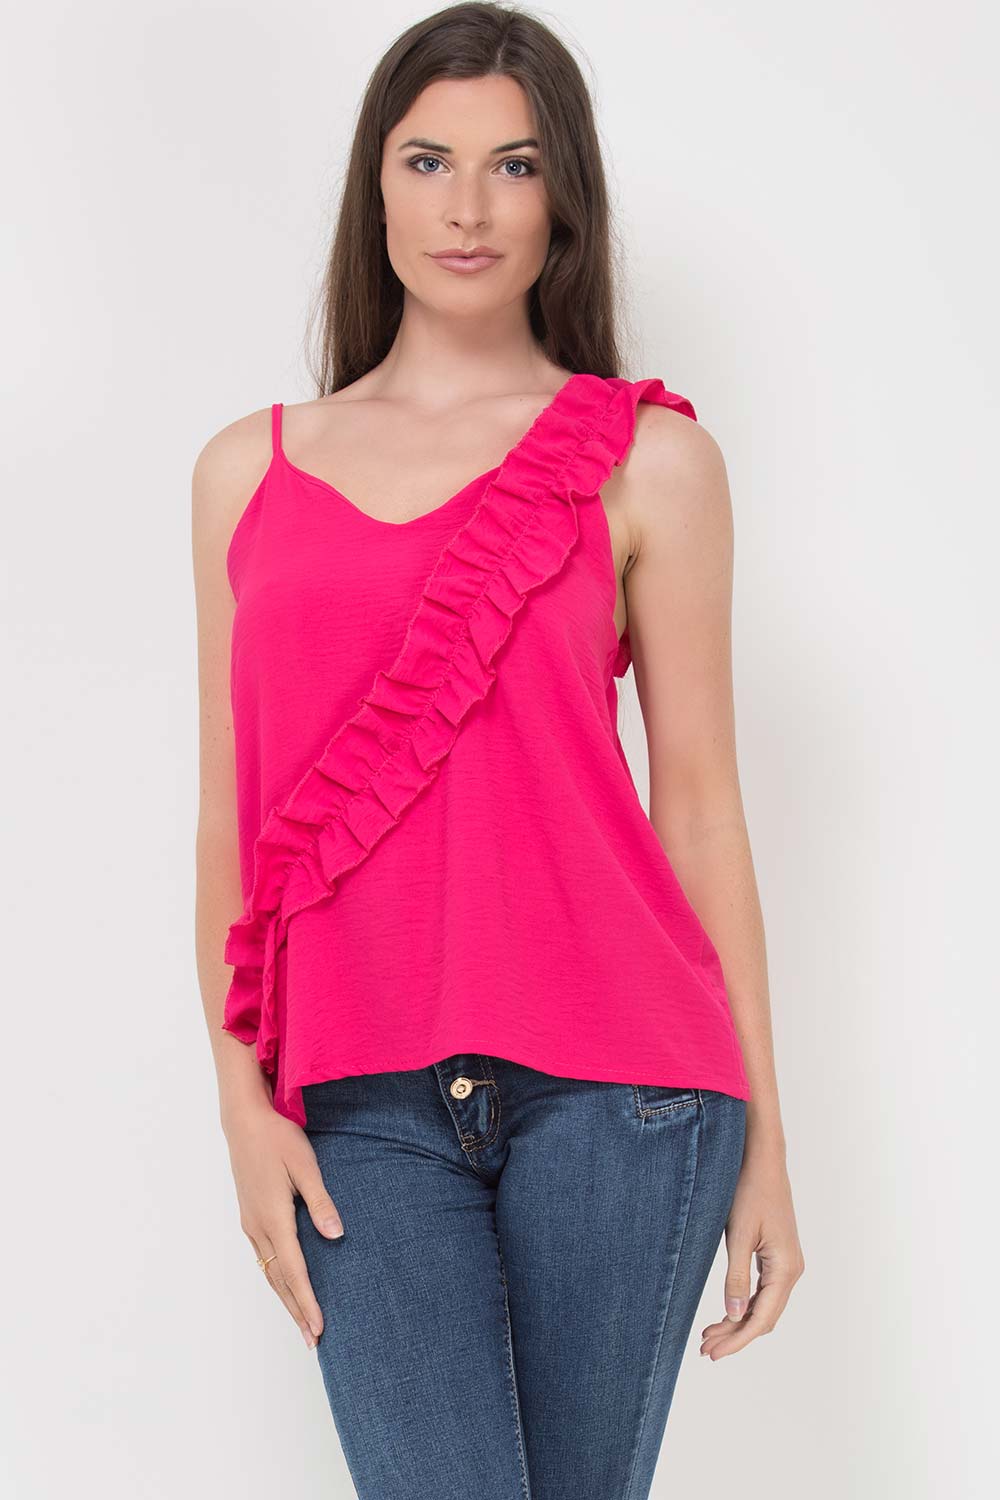 pink ruffle ruched detail top uk